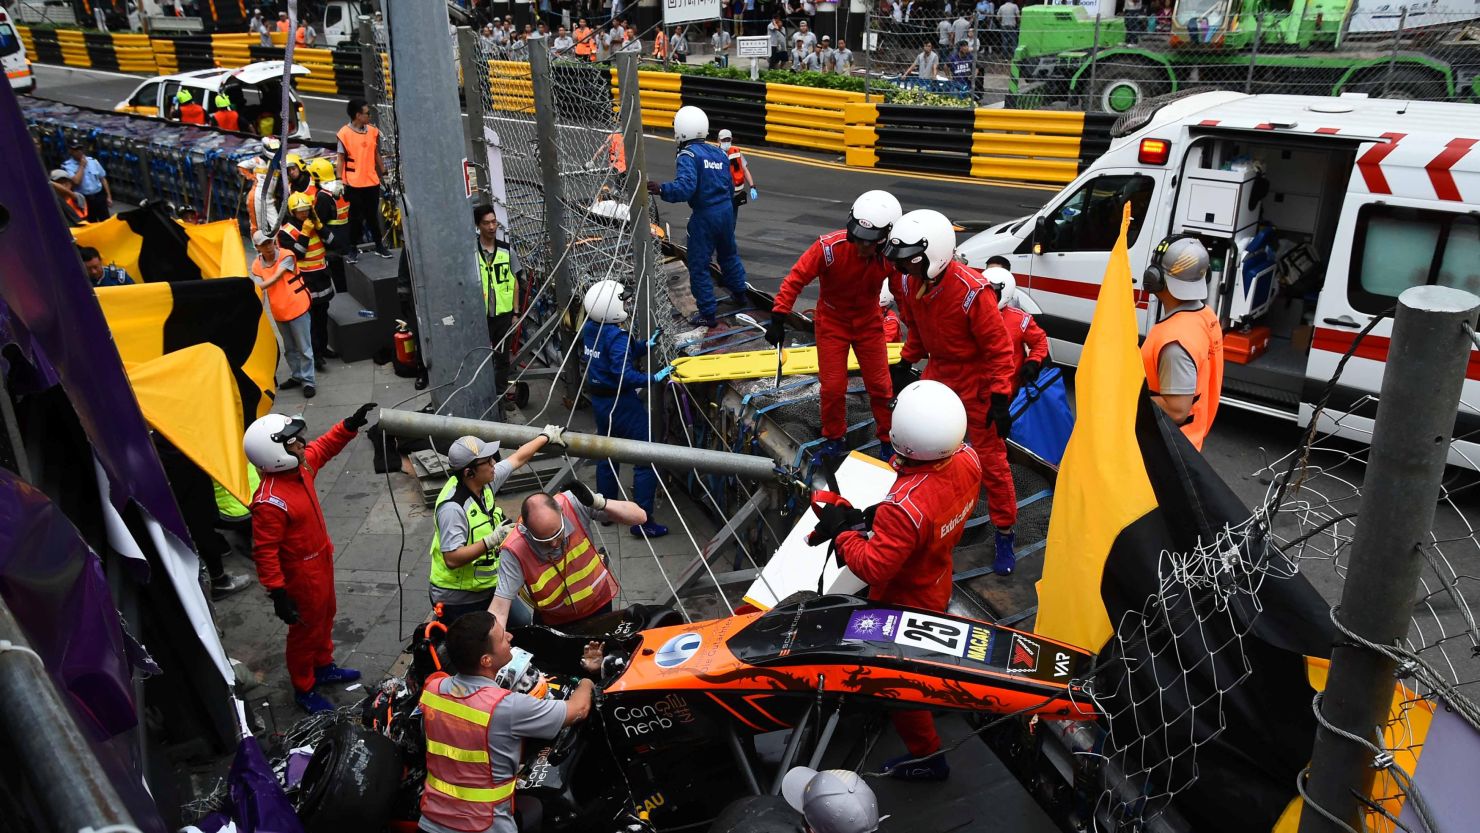 Race personnel and pit crew are seen at the accident site after Sophia Floersch flew over the barriers and crashed into a fence during a Formula Three race at the Macau Grand Prix.